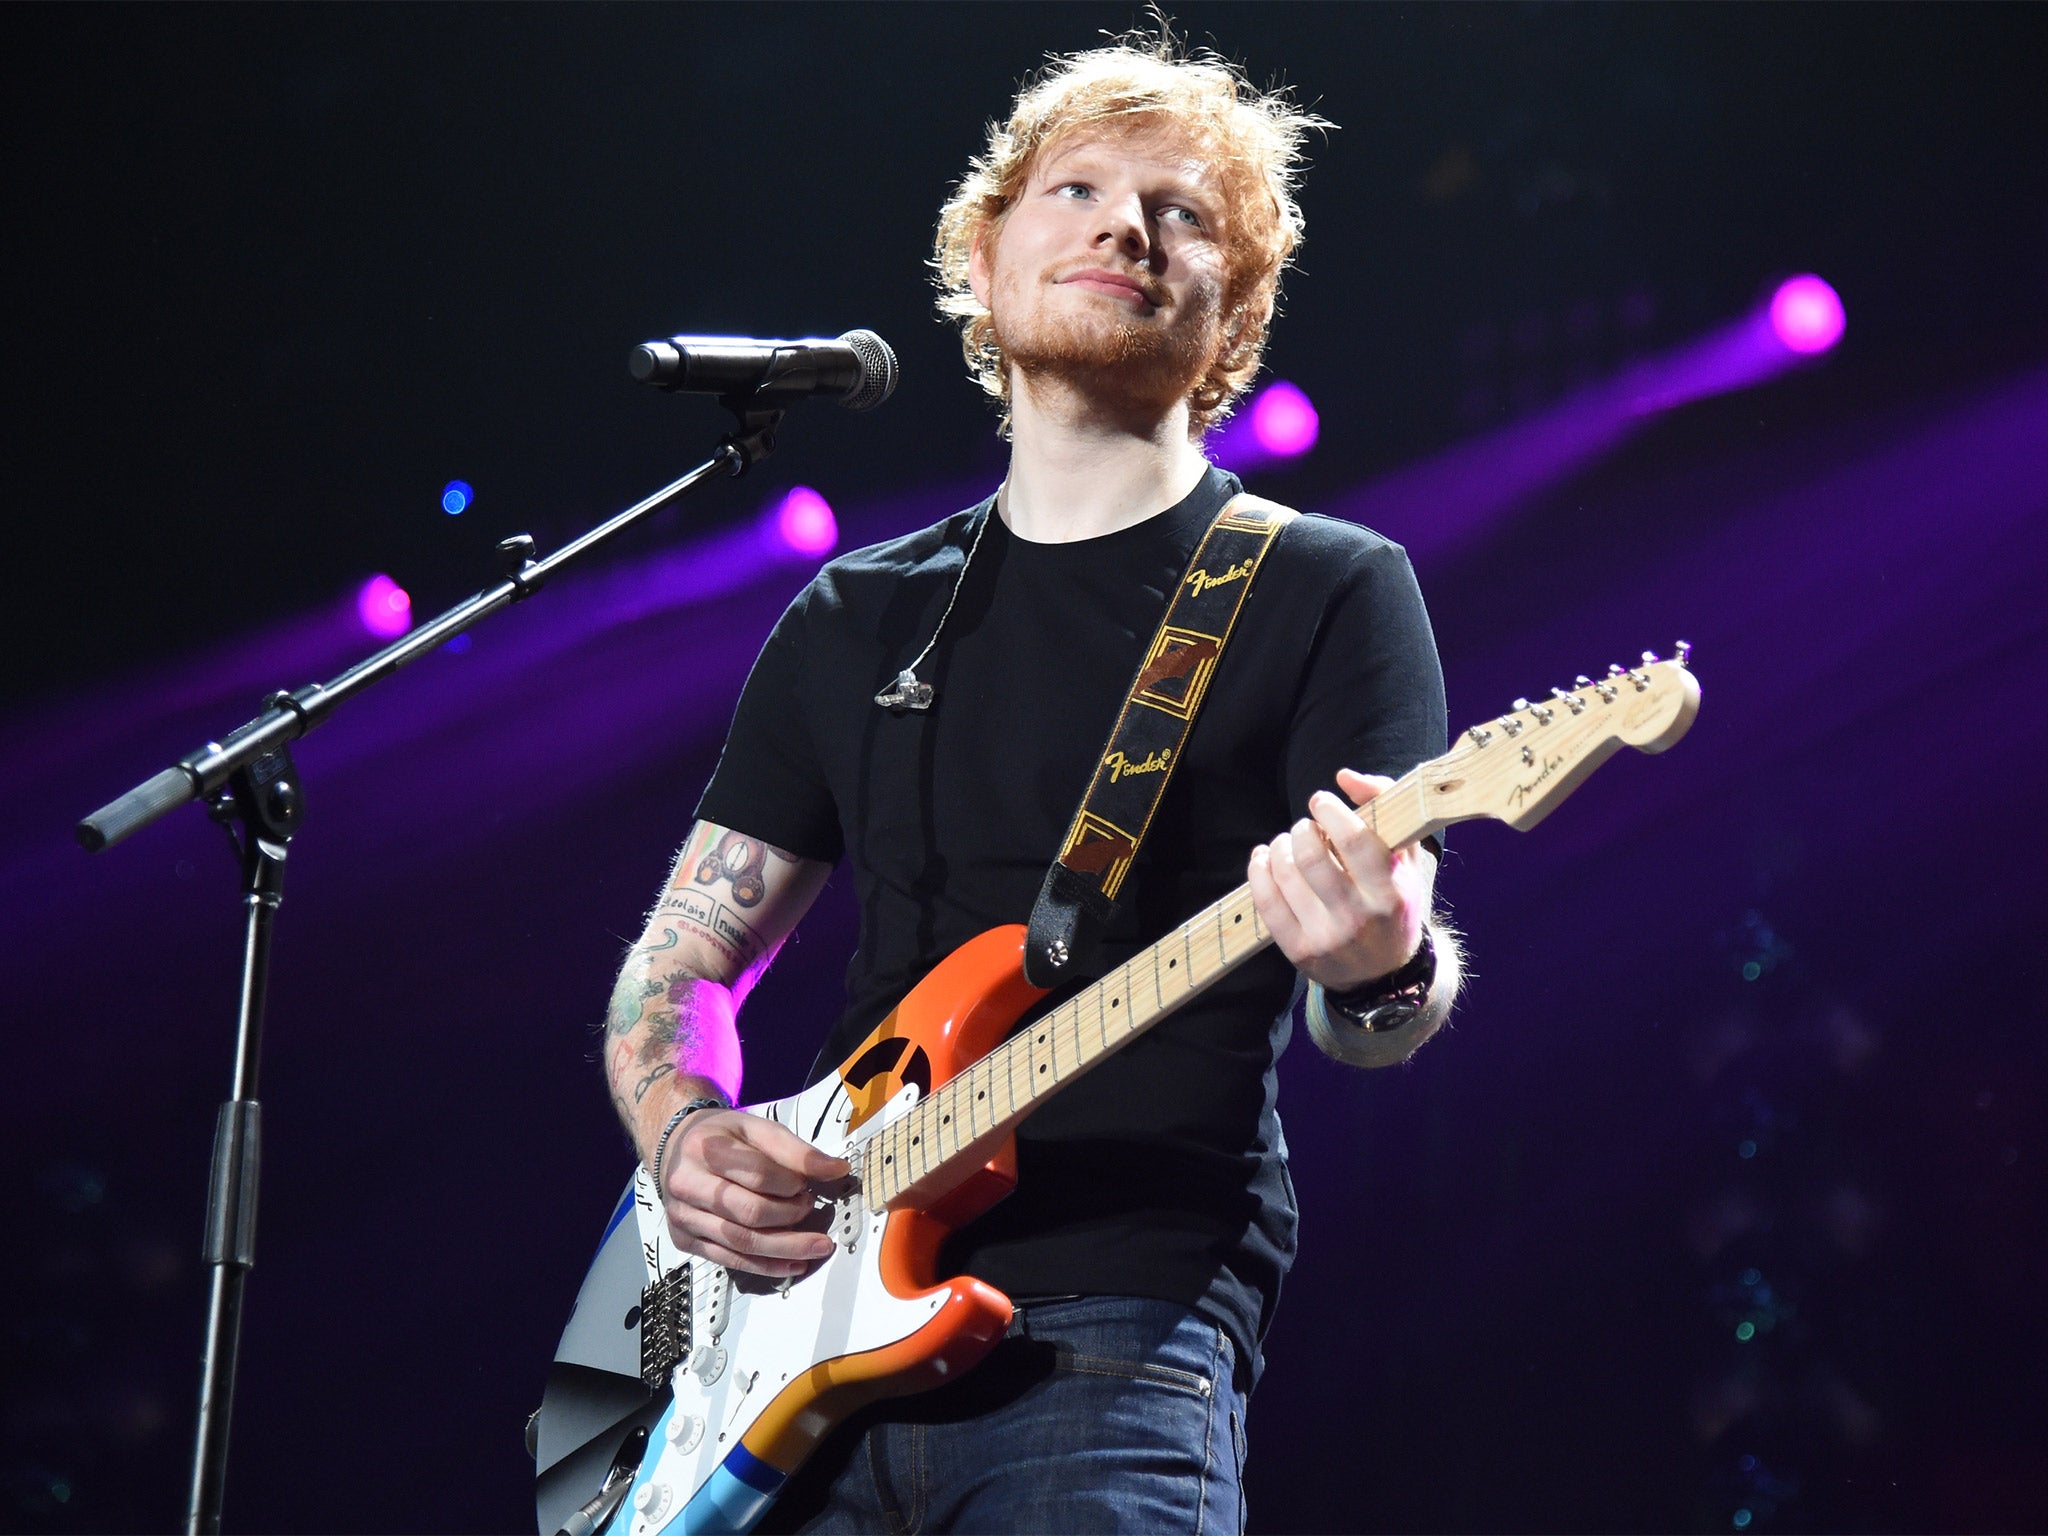 Ed Sheeran has reportedly landed himself a proper TV role in upcoming drama The Bastard Executioner